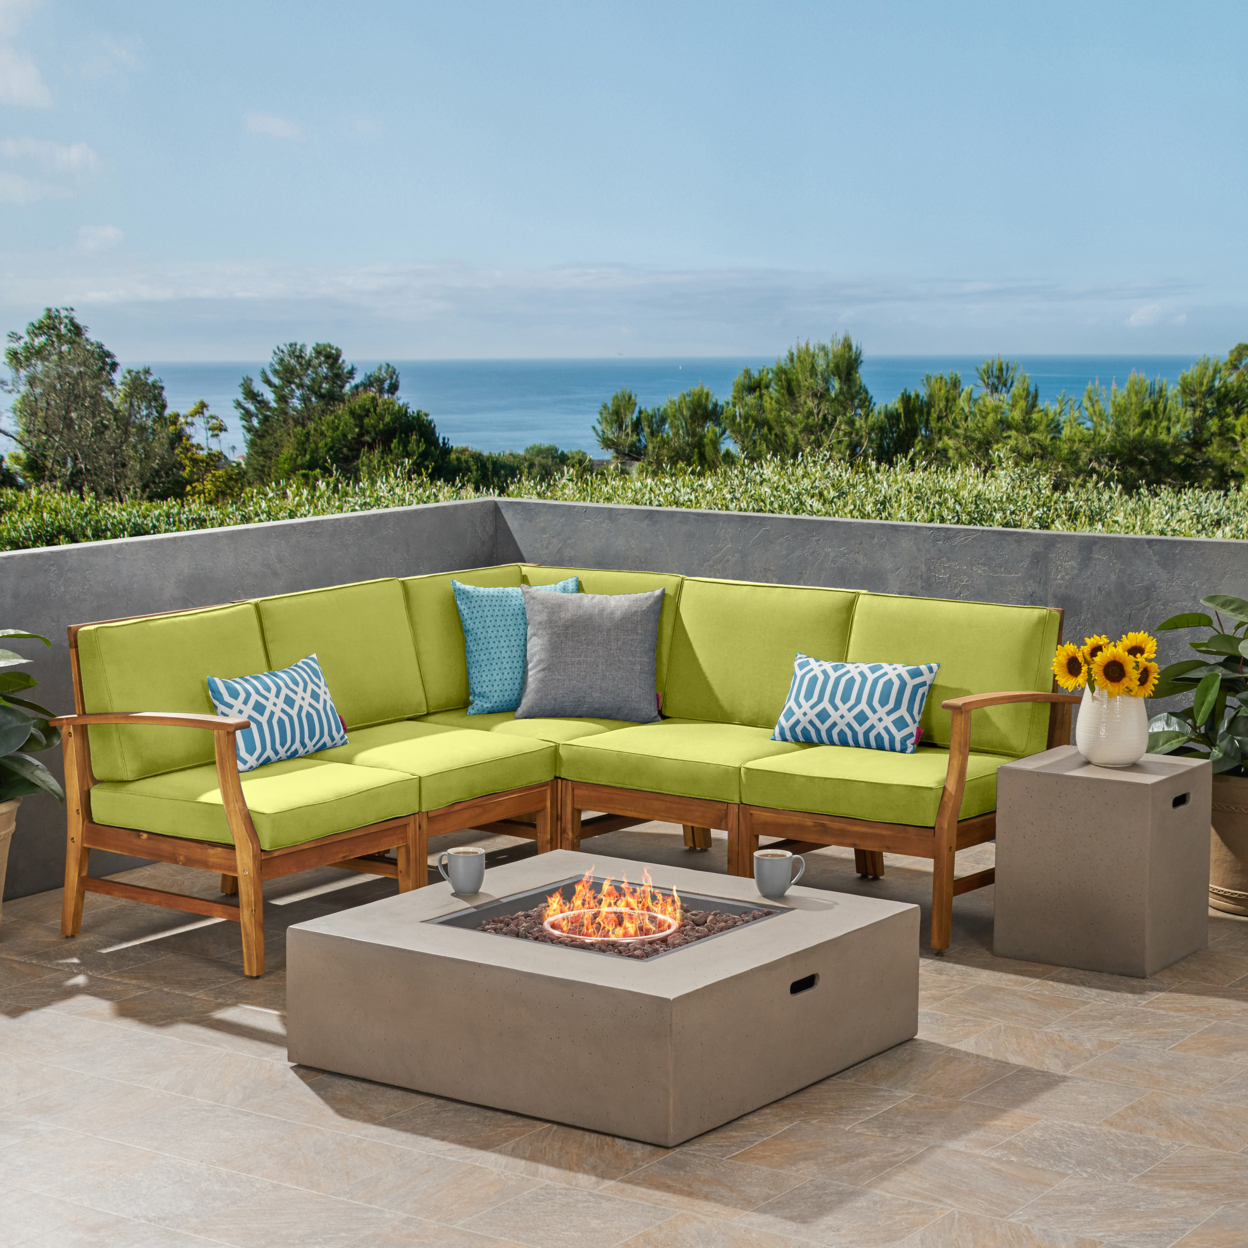 Esther Outdoor 5 Seater V-Shaped Acacia Wood Sofa Set With Square Fire Pit - Teak + Green + Light Gray